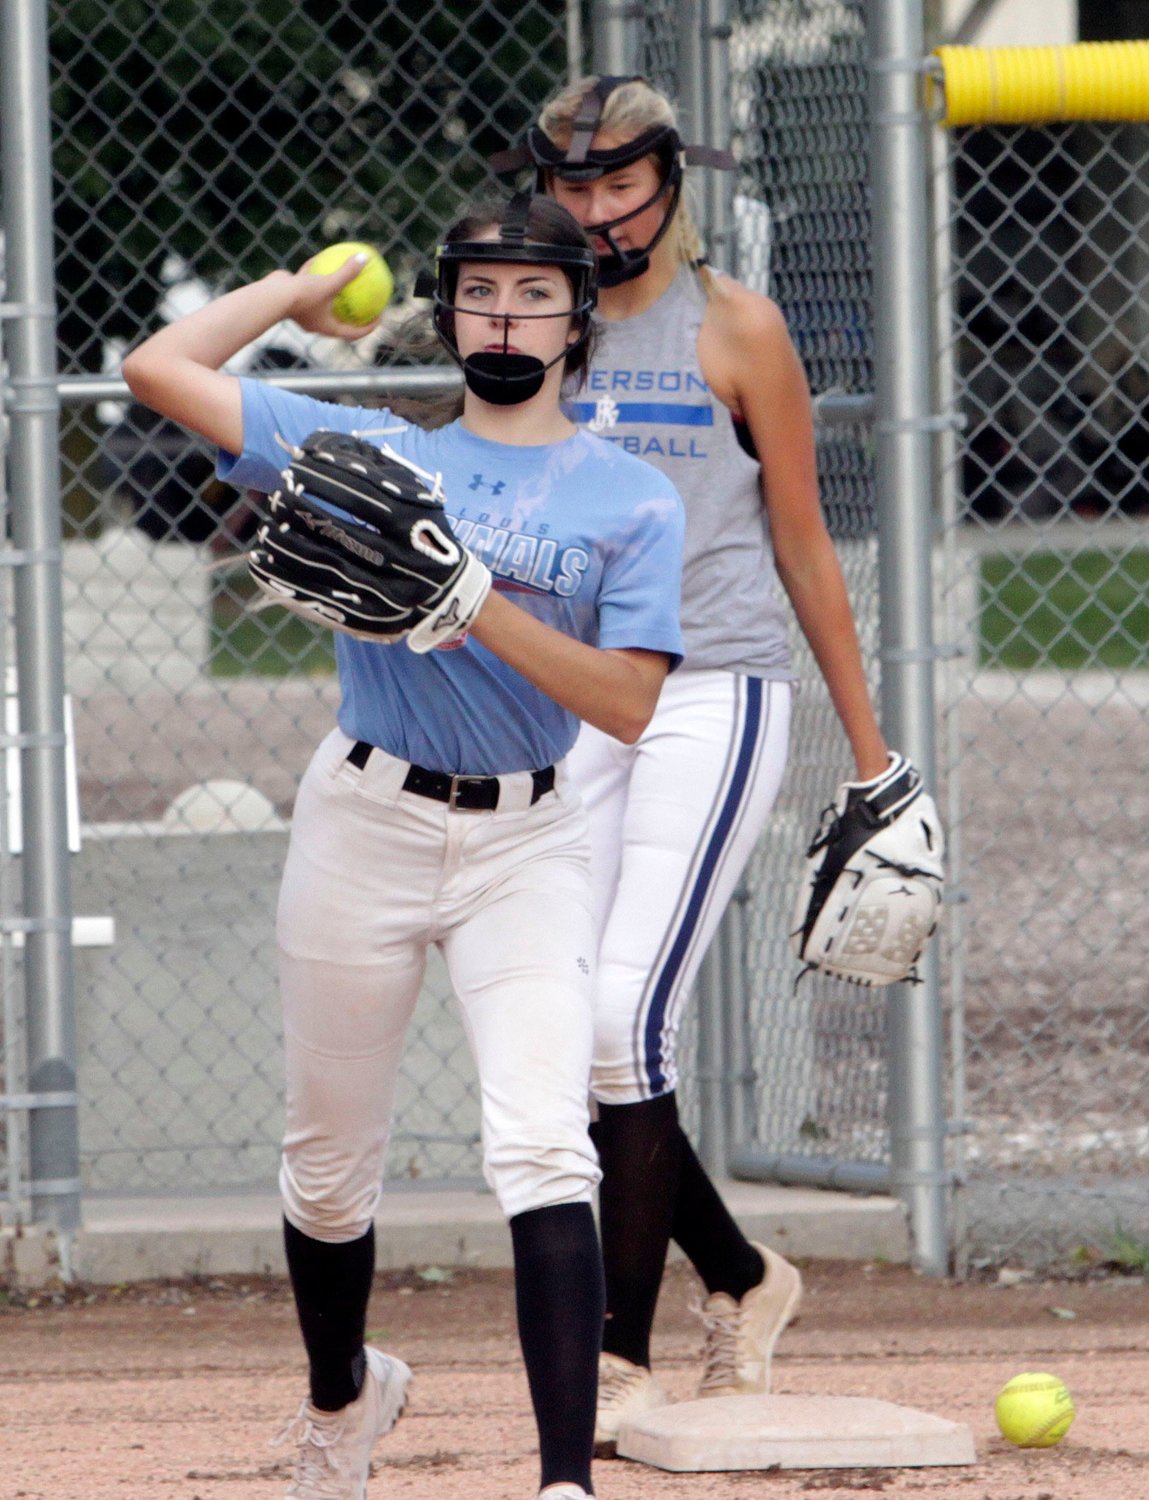 Darcy Pierce, a Cairo junior pegged to be the Lady 'Cats starting catcher this 2021 fall campaign, makes a throw during a preseason morning workout Wednesday, Aug. 11. Standing behind her is fellow junior Iszy Zenker who returns to start at second base.